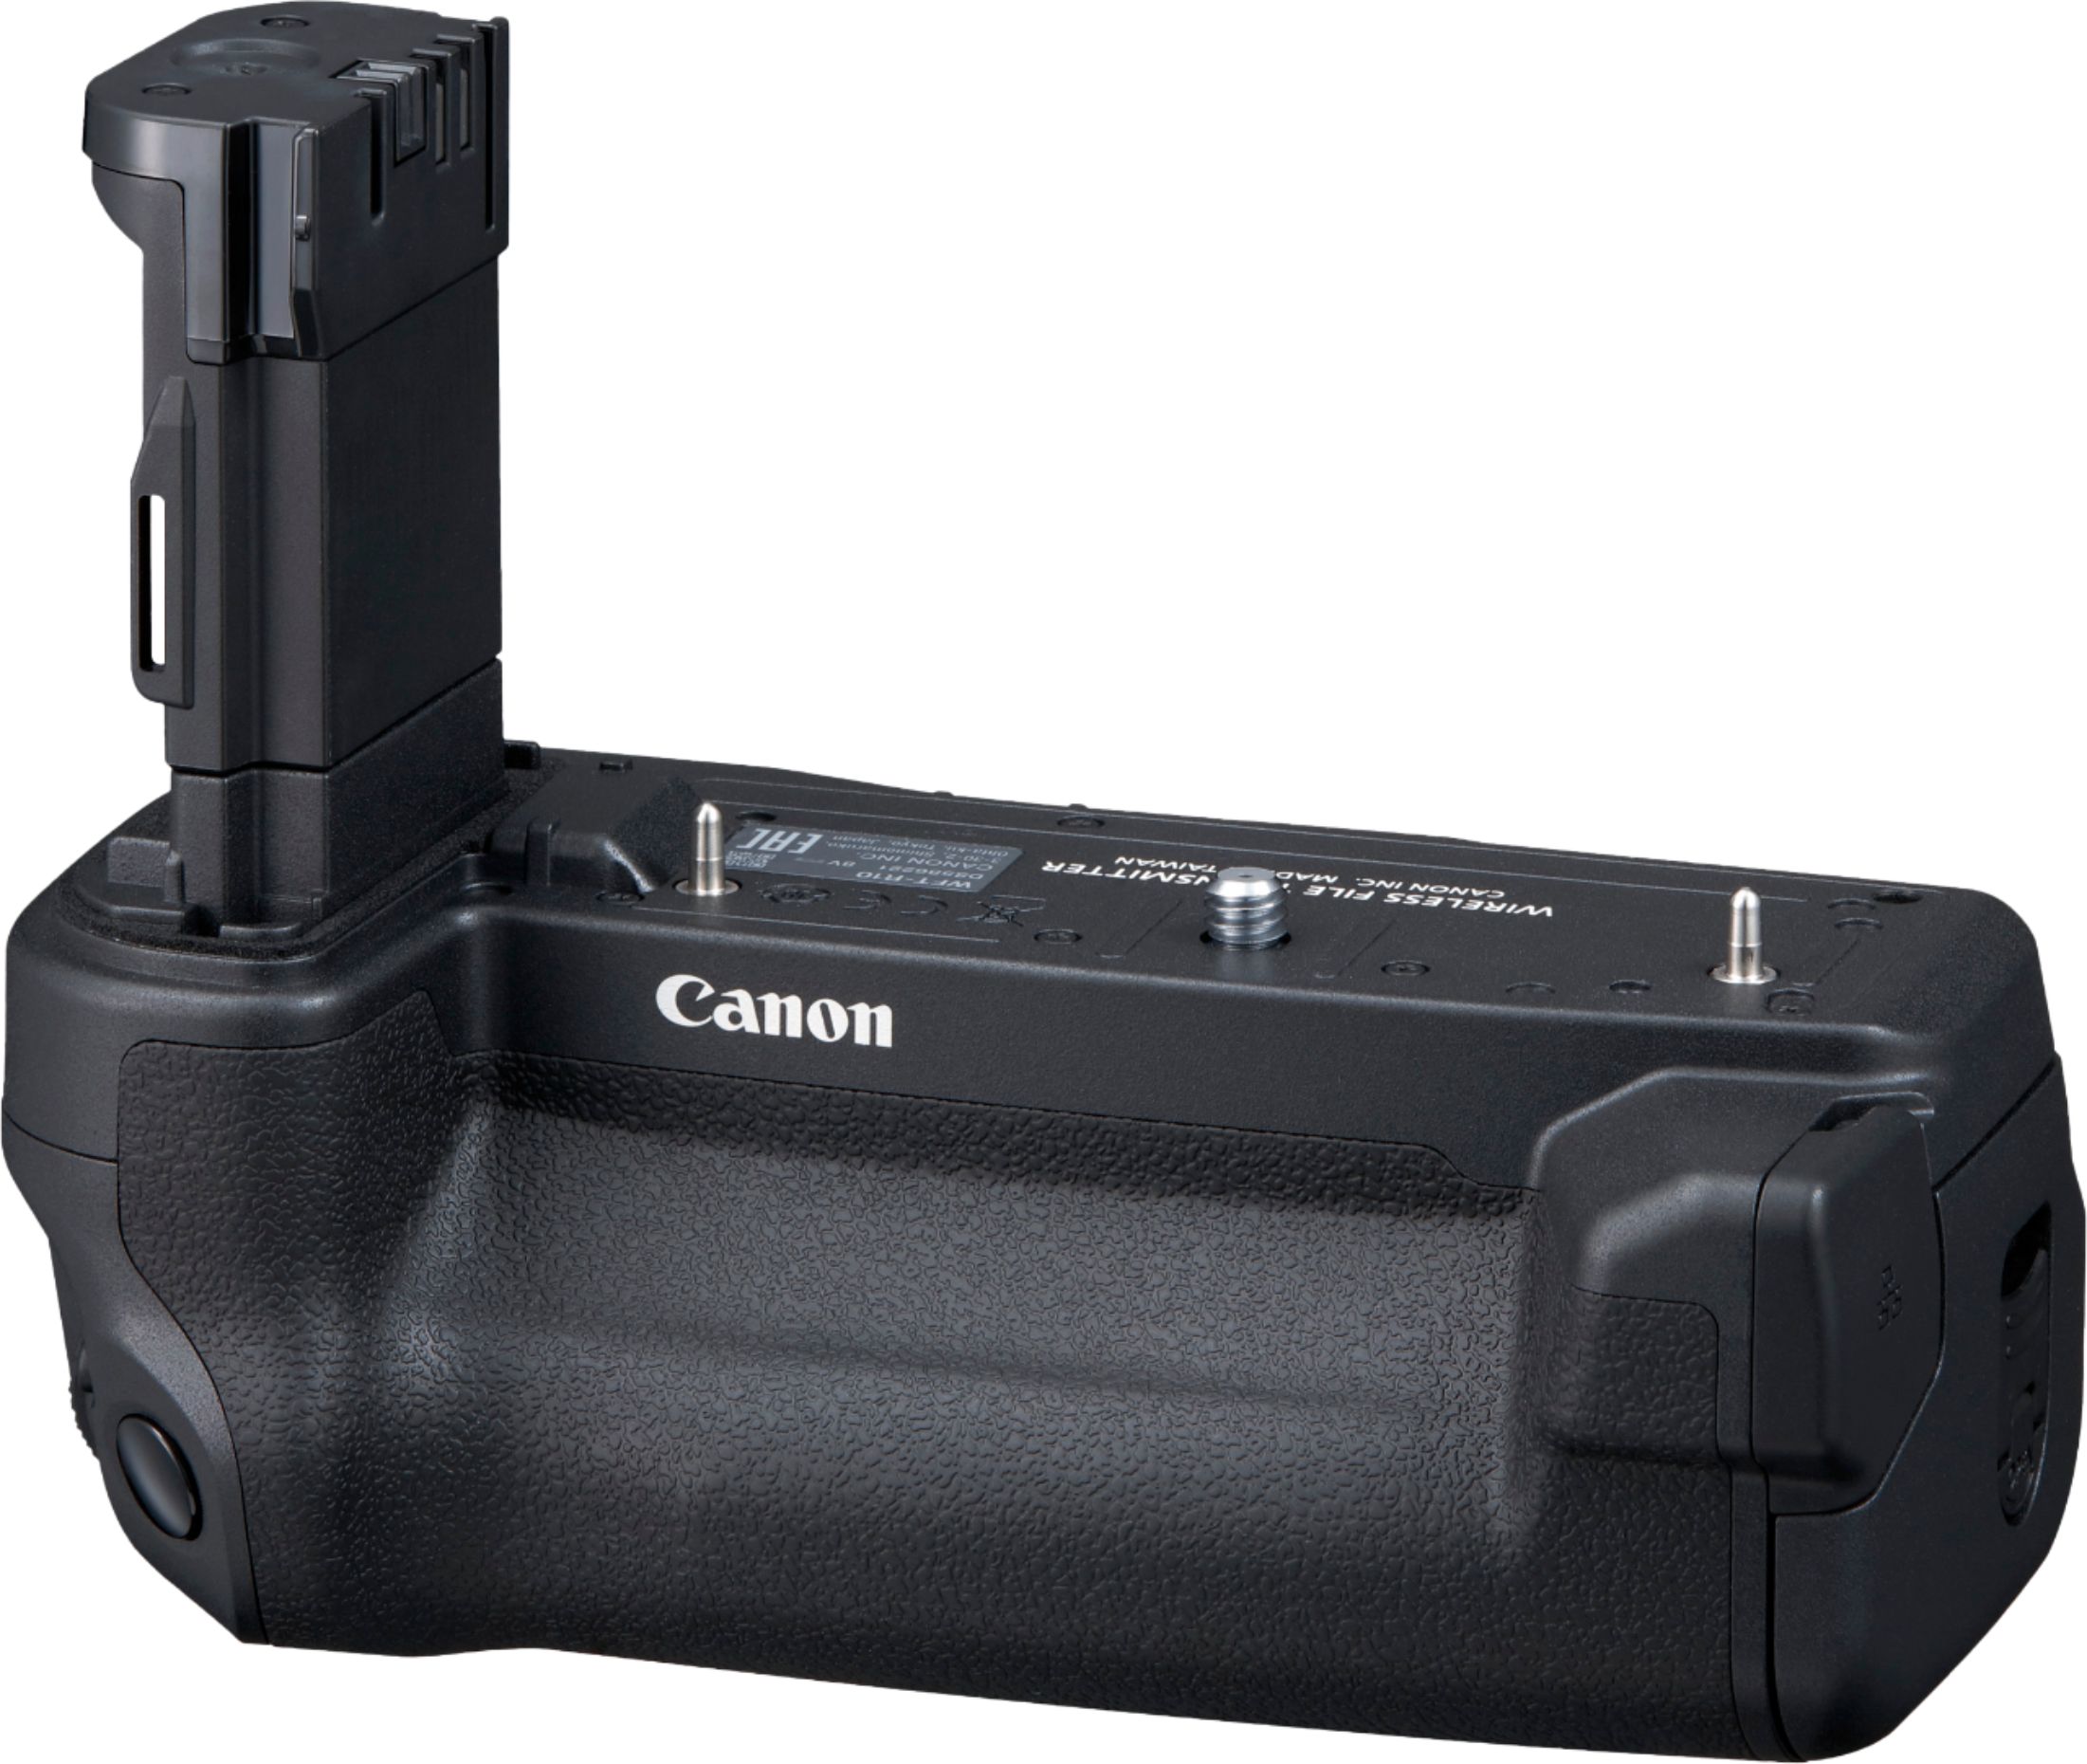 Angle View: Canon - Wireless File Transmitter WFT-R10A - Black